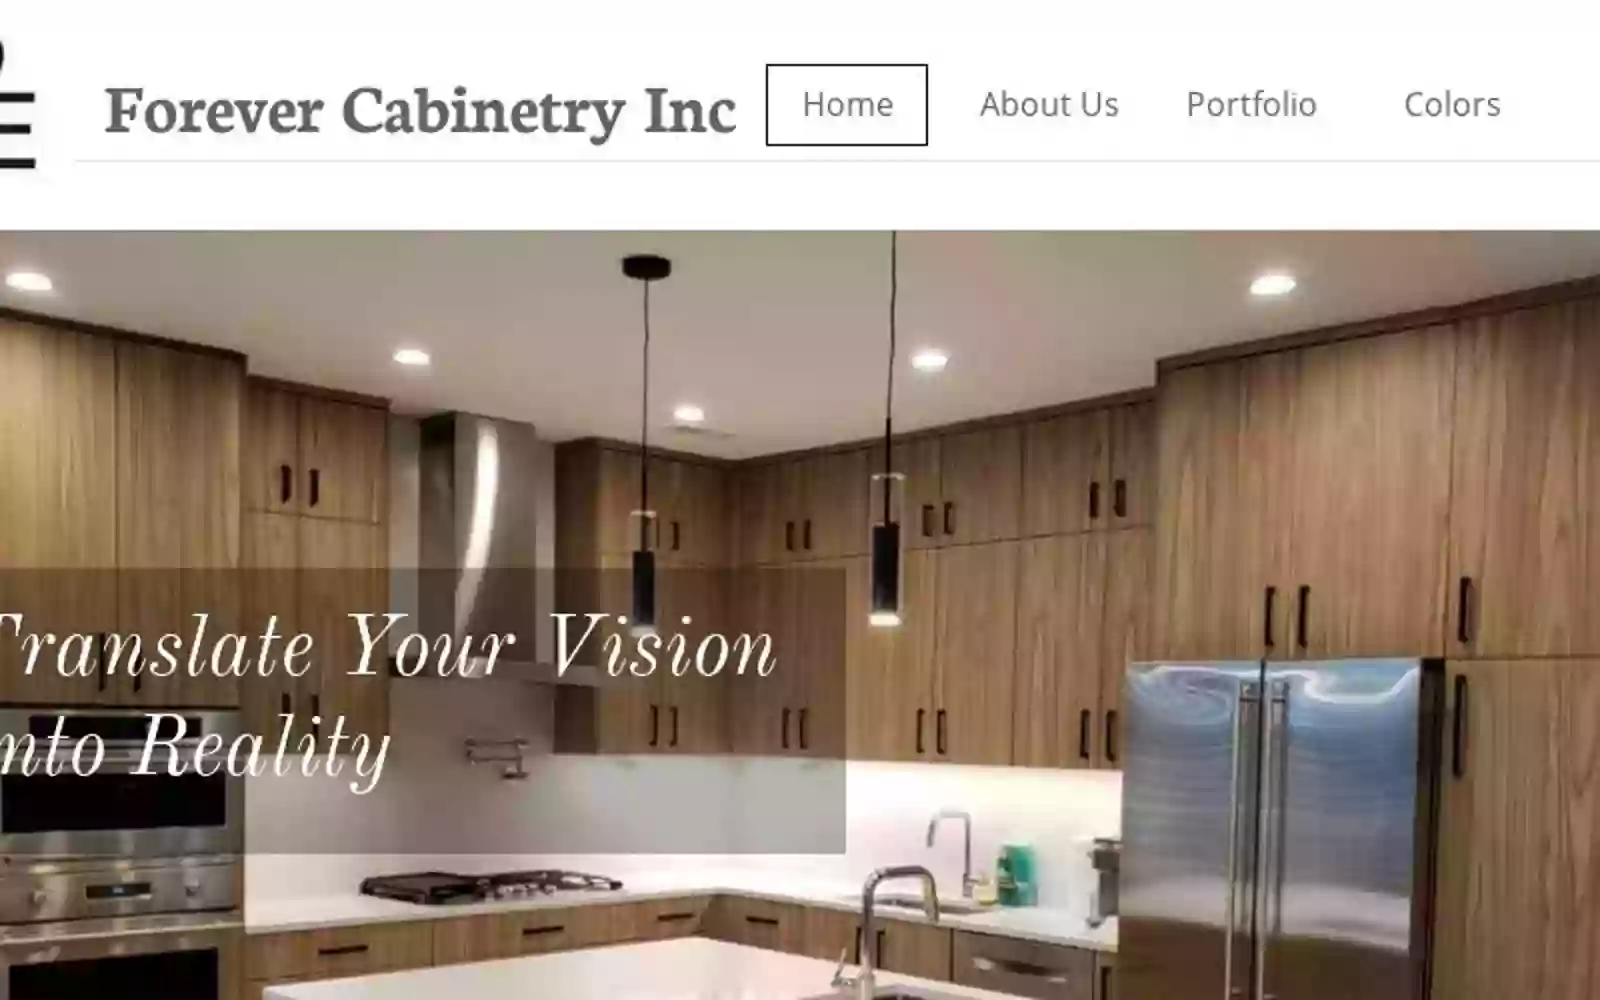 Forever Cabinetry Inc.